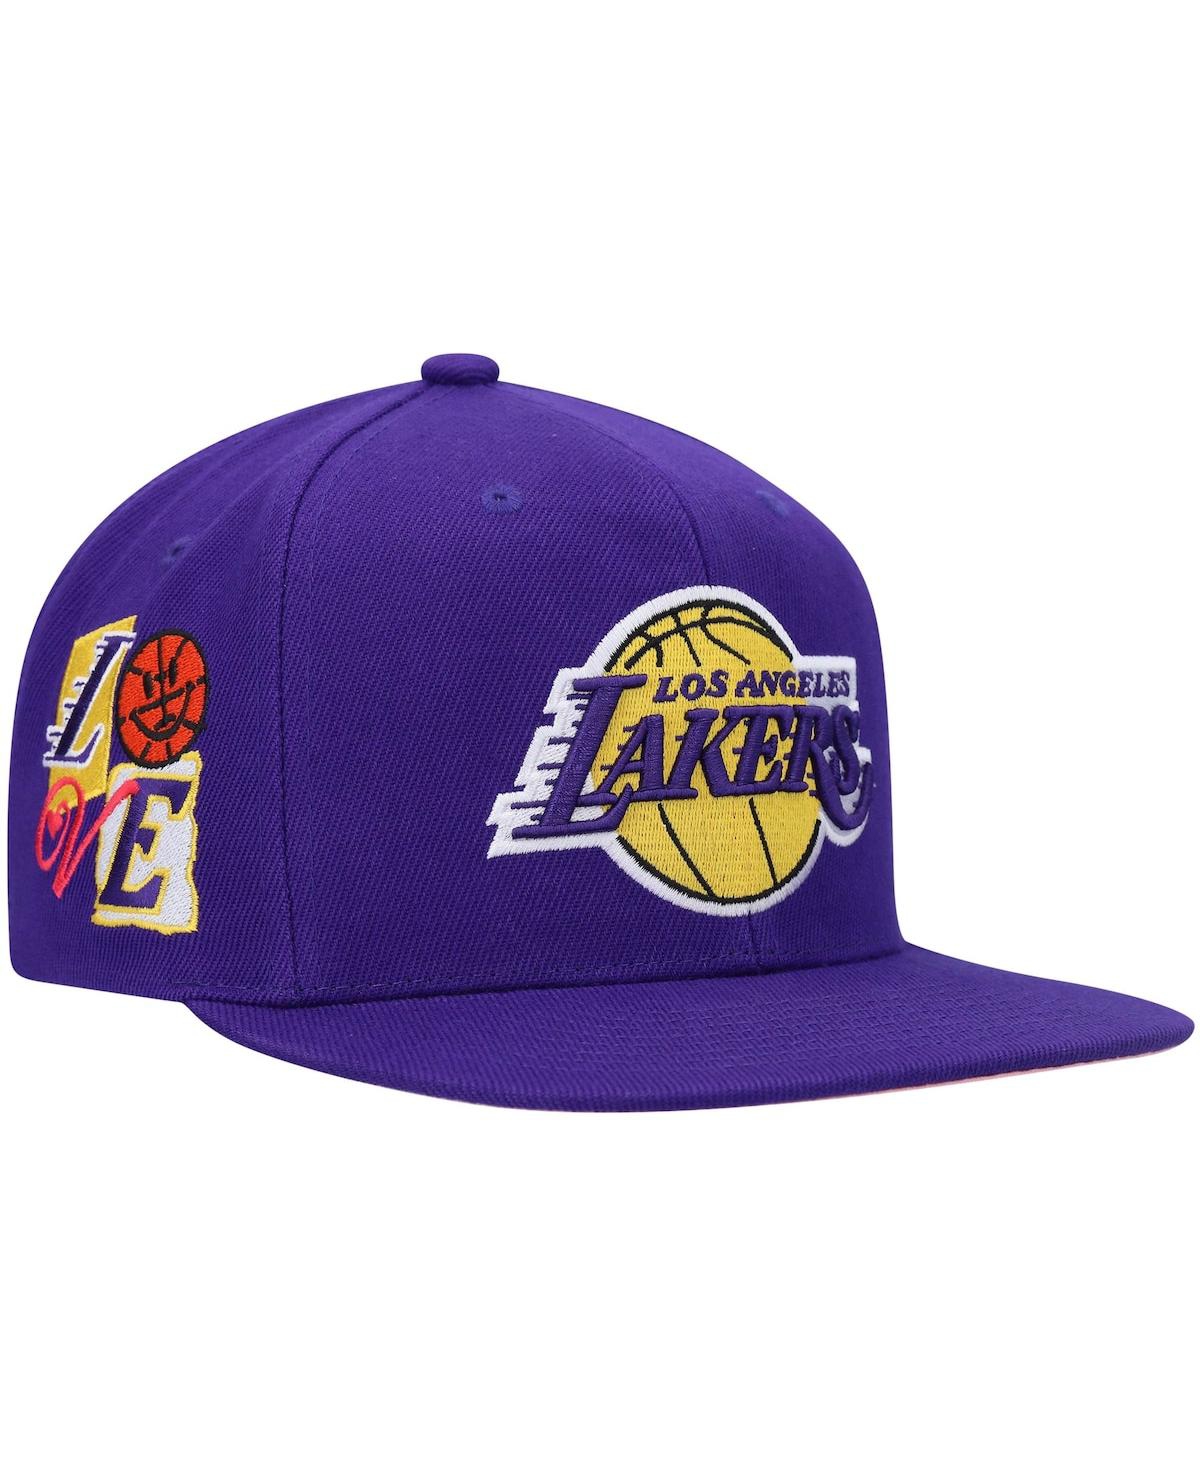 Shop Mitchell & Ness Men's  Purple Los Angeles Lakers All Love Snapback Hat